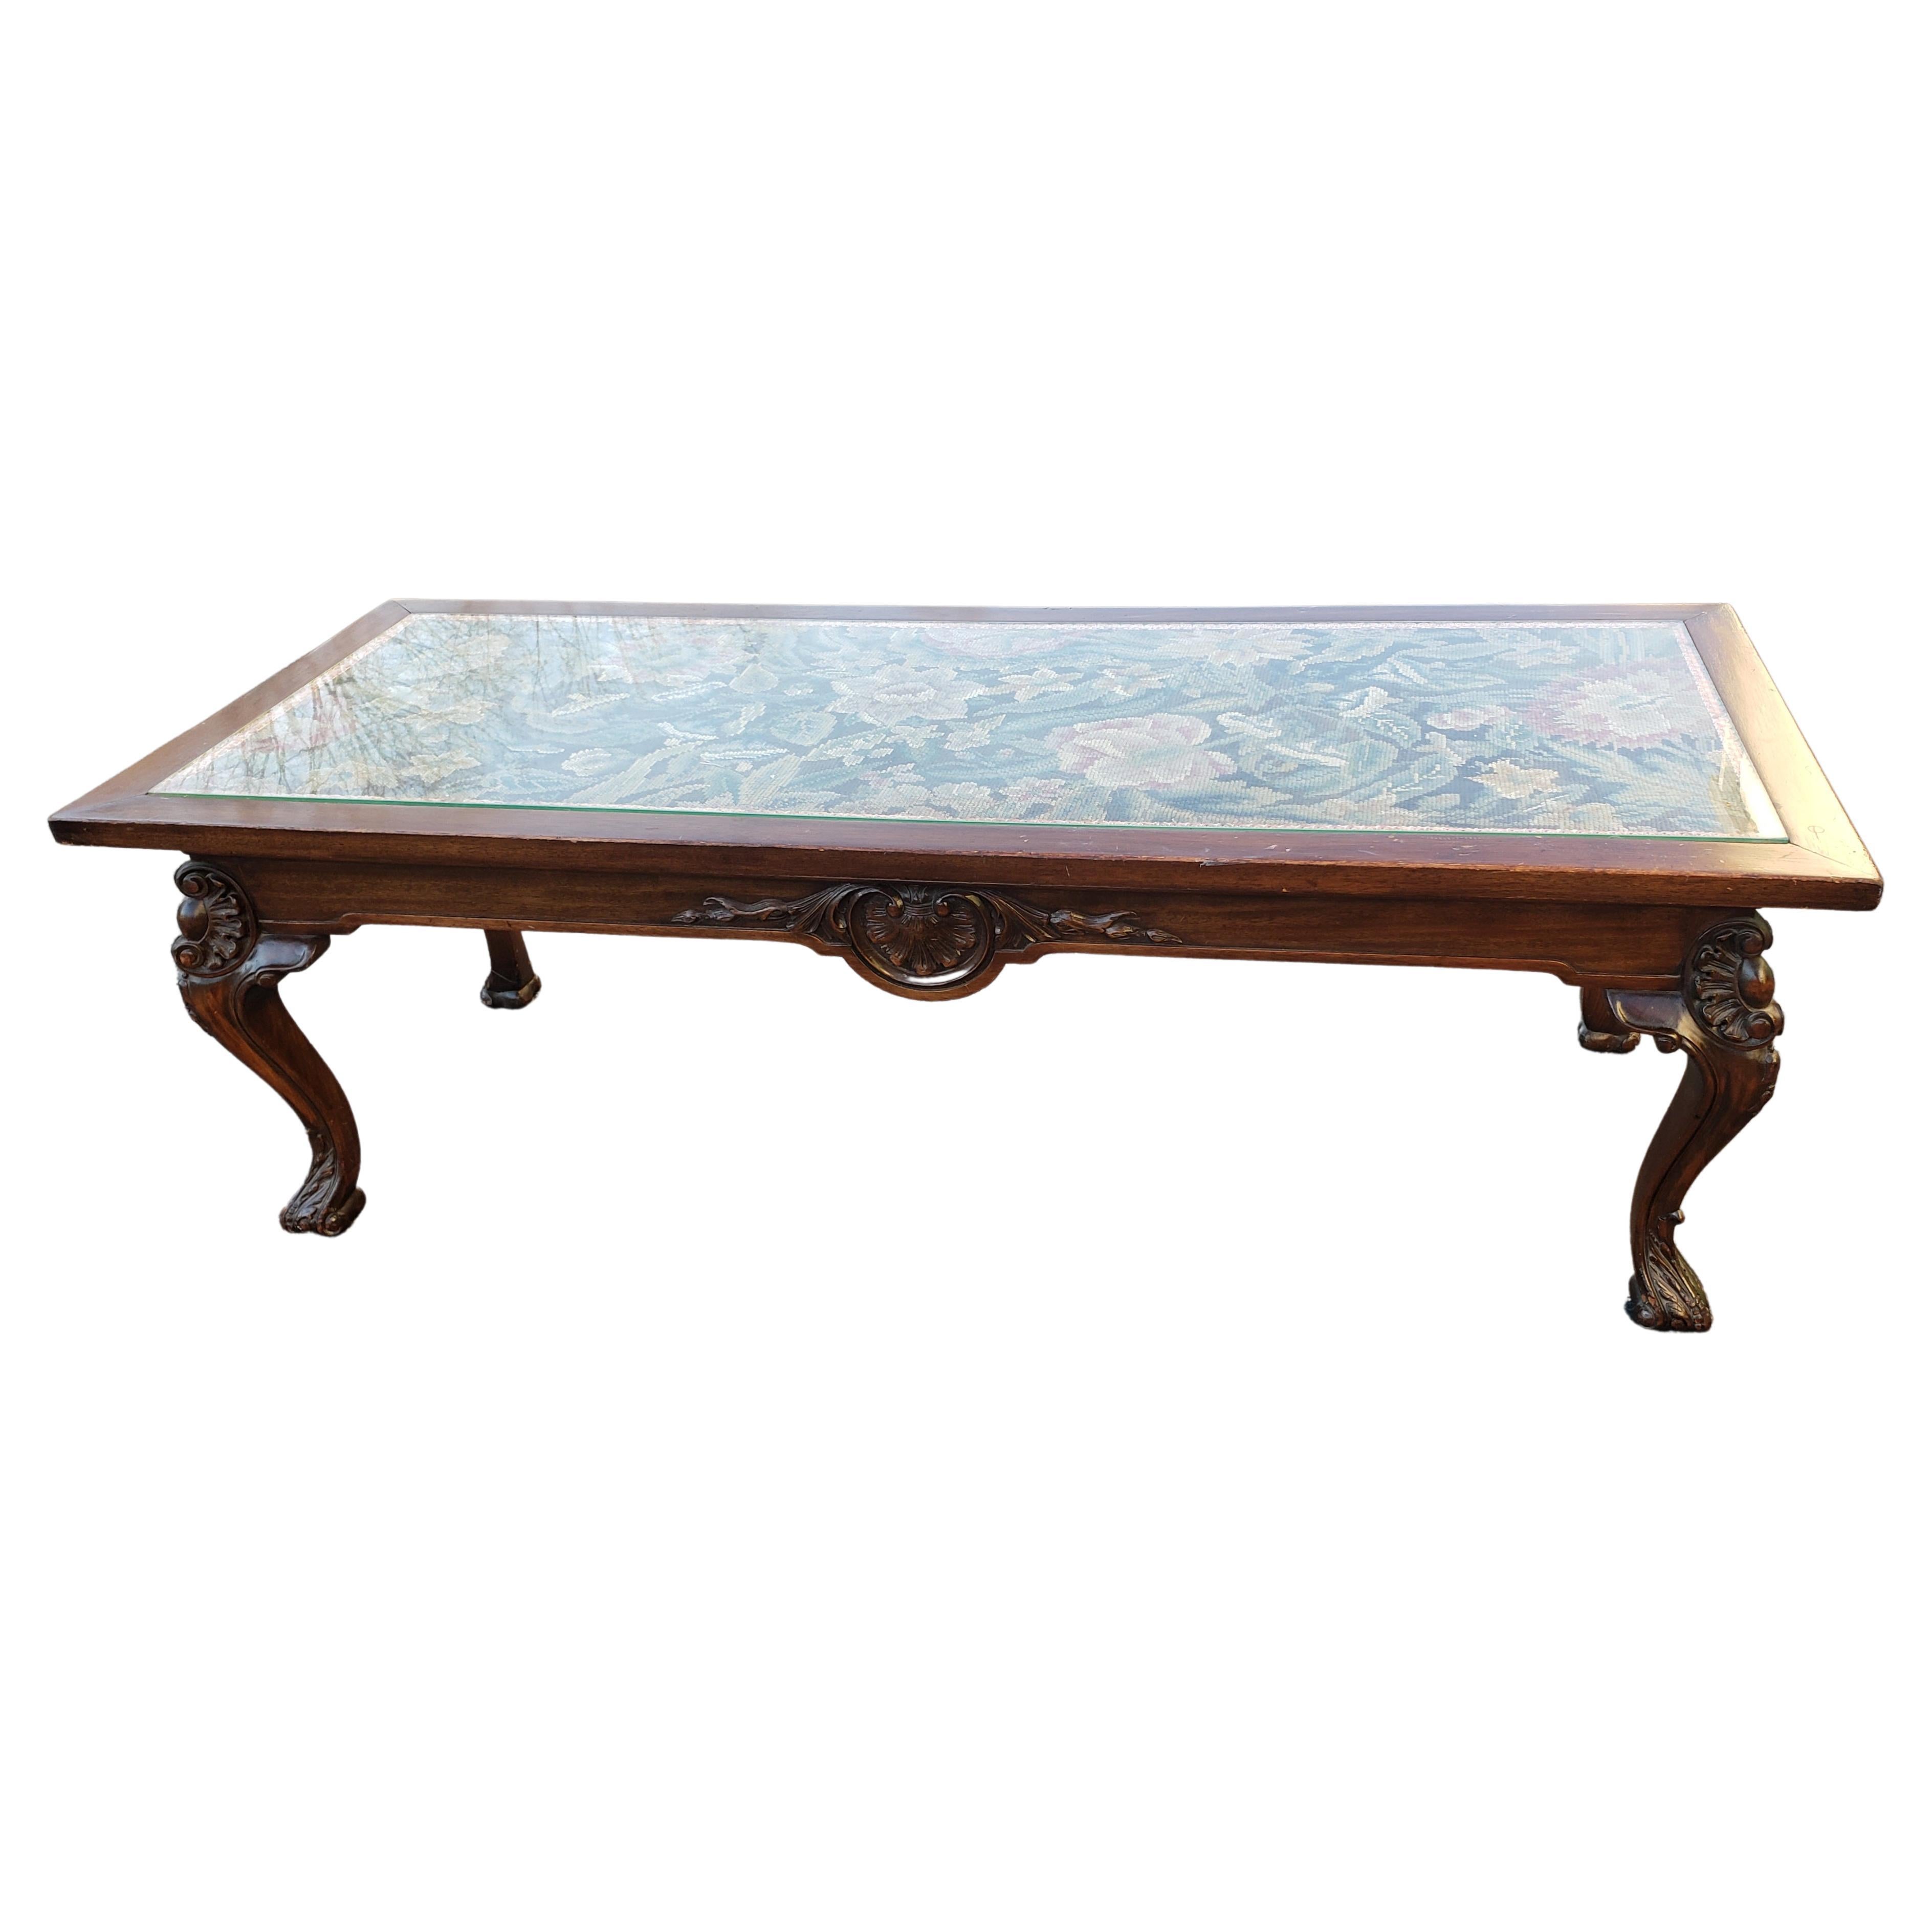 Hand Carved Mahogany Coffee Table W Glass Top Insert over Handmade Fabric For Sale 1